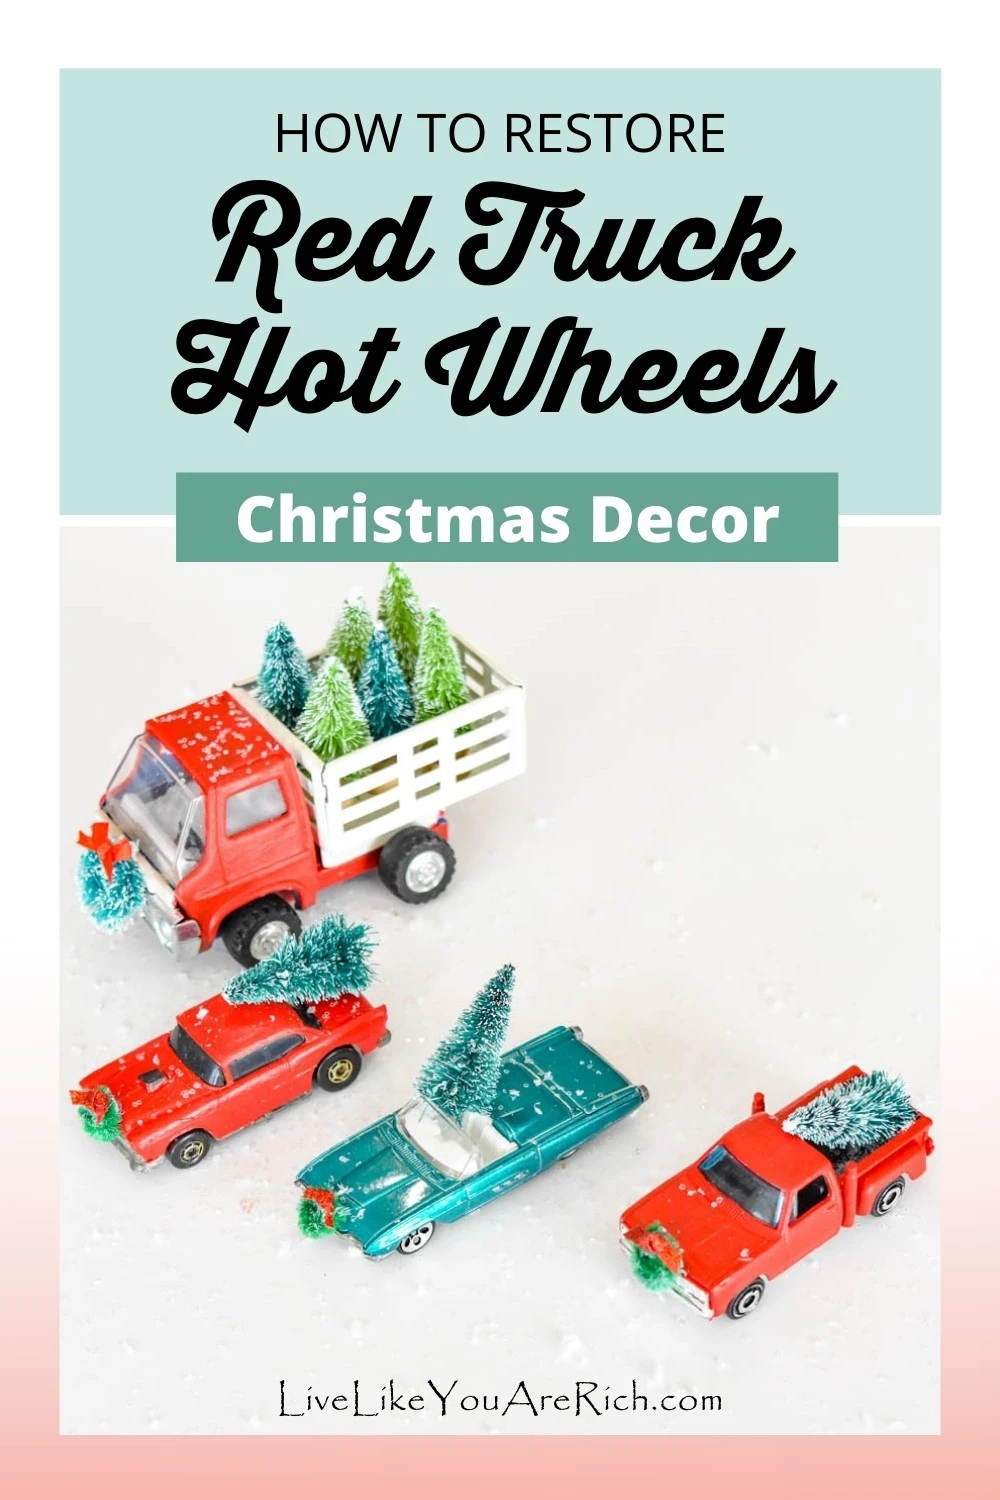 This Christmas red truck hot wheels restoration craft is fun, inexpensive and quick. Plus, they make really cute decorations when finished. I don’t always decorate with “trendy” decorations. However, I couldn’t help but decorate in the Red Truck Christmas theme this year. It is the right balance of vintage and cutesy, fun and classy.